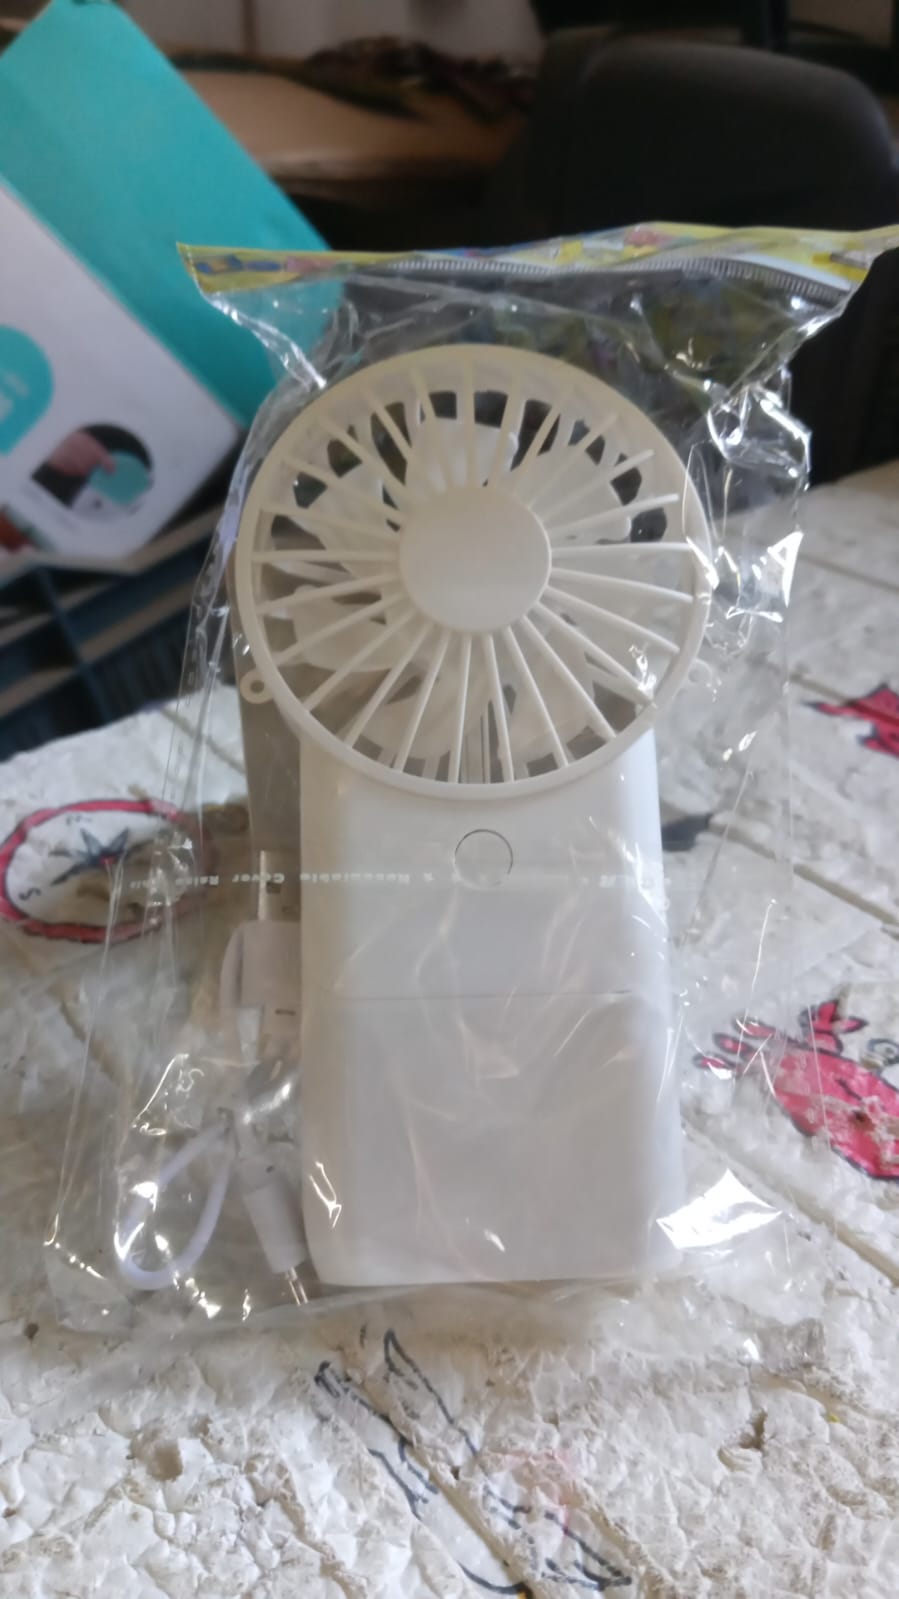 17730 Portable Small Electric Fan, Handheld Fan With 3 Modes USB Rechargeable Mini Student Handheld Class Personal Fan (1 Pc)